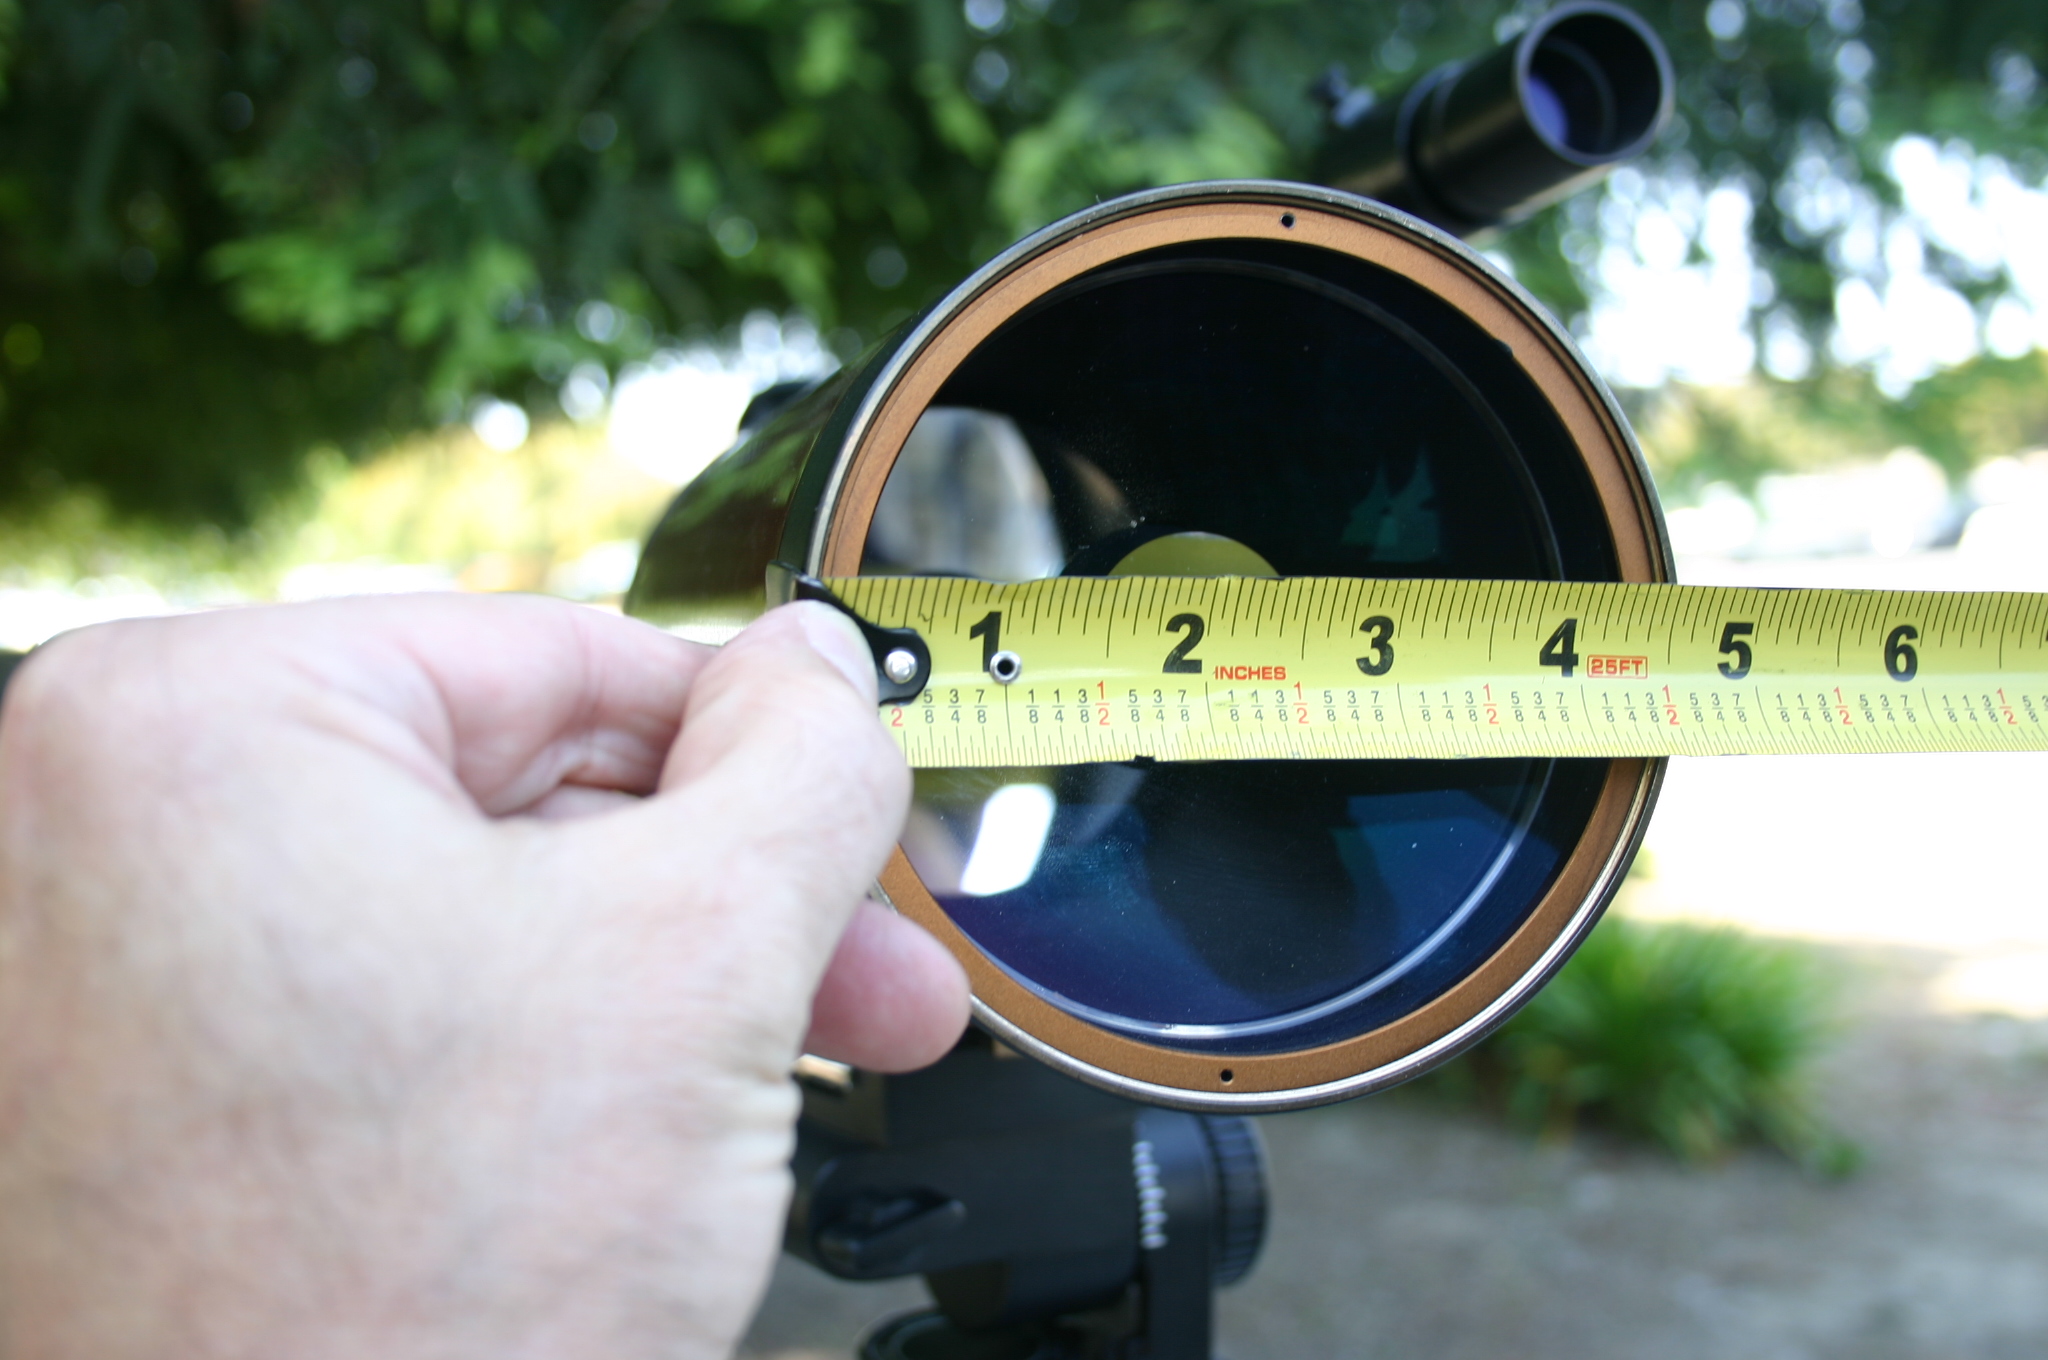 Measure the maximum outside (OD) of the front end of your binocular